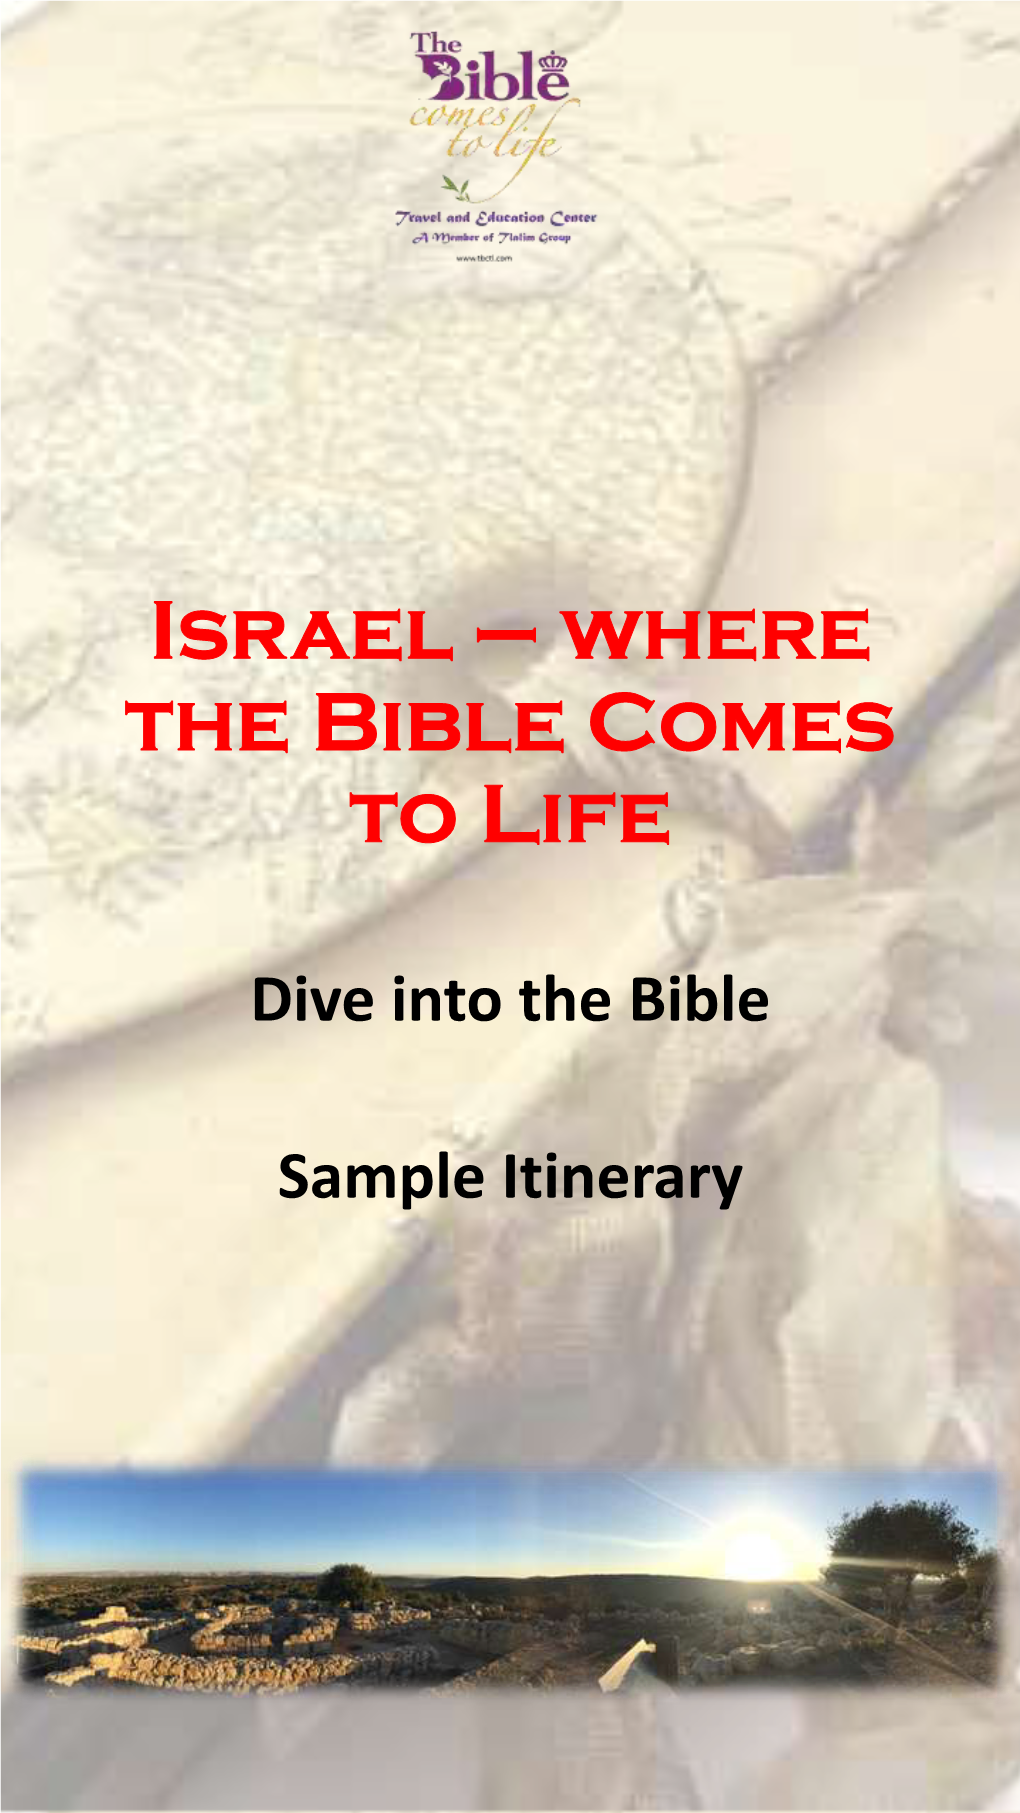 Israel – Where the Bible Comes to Life